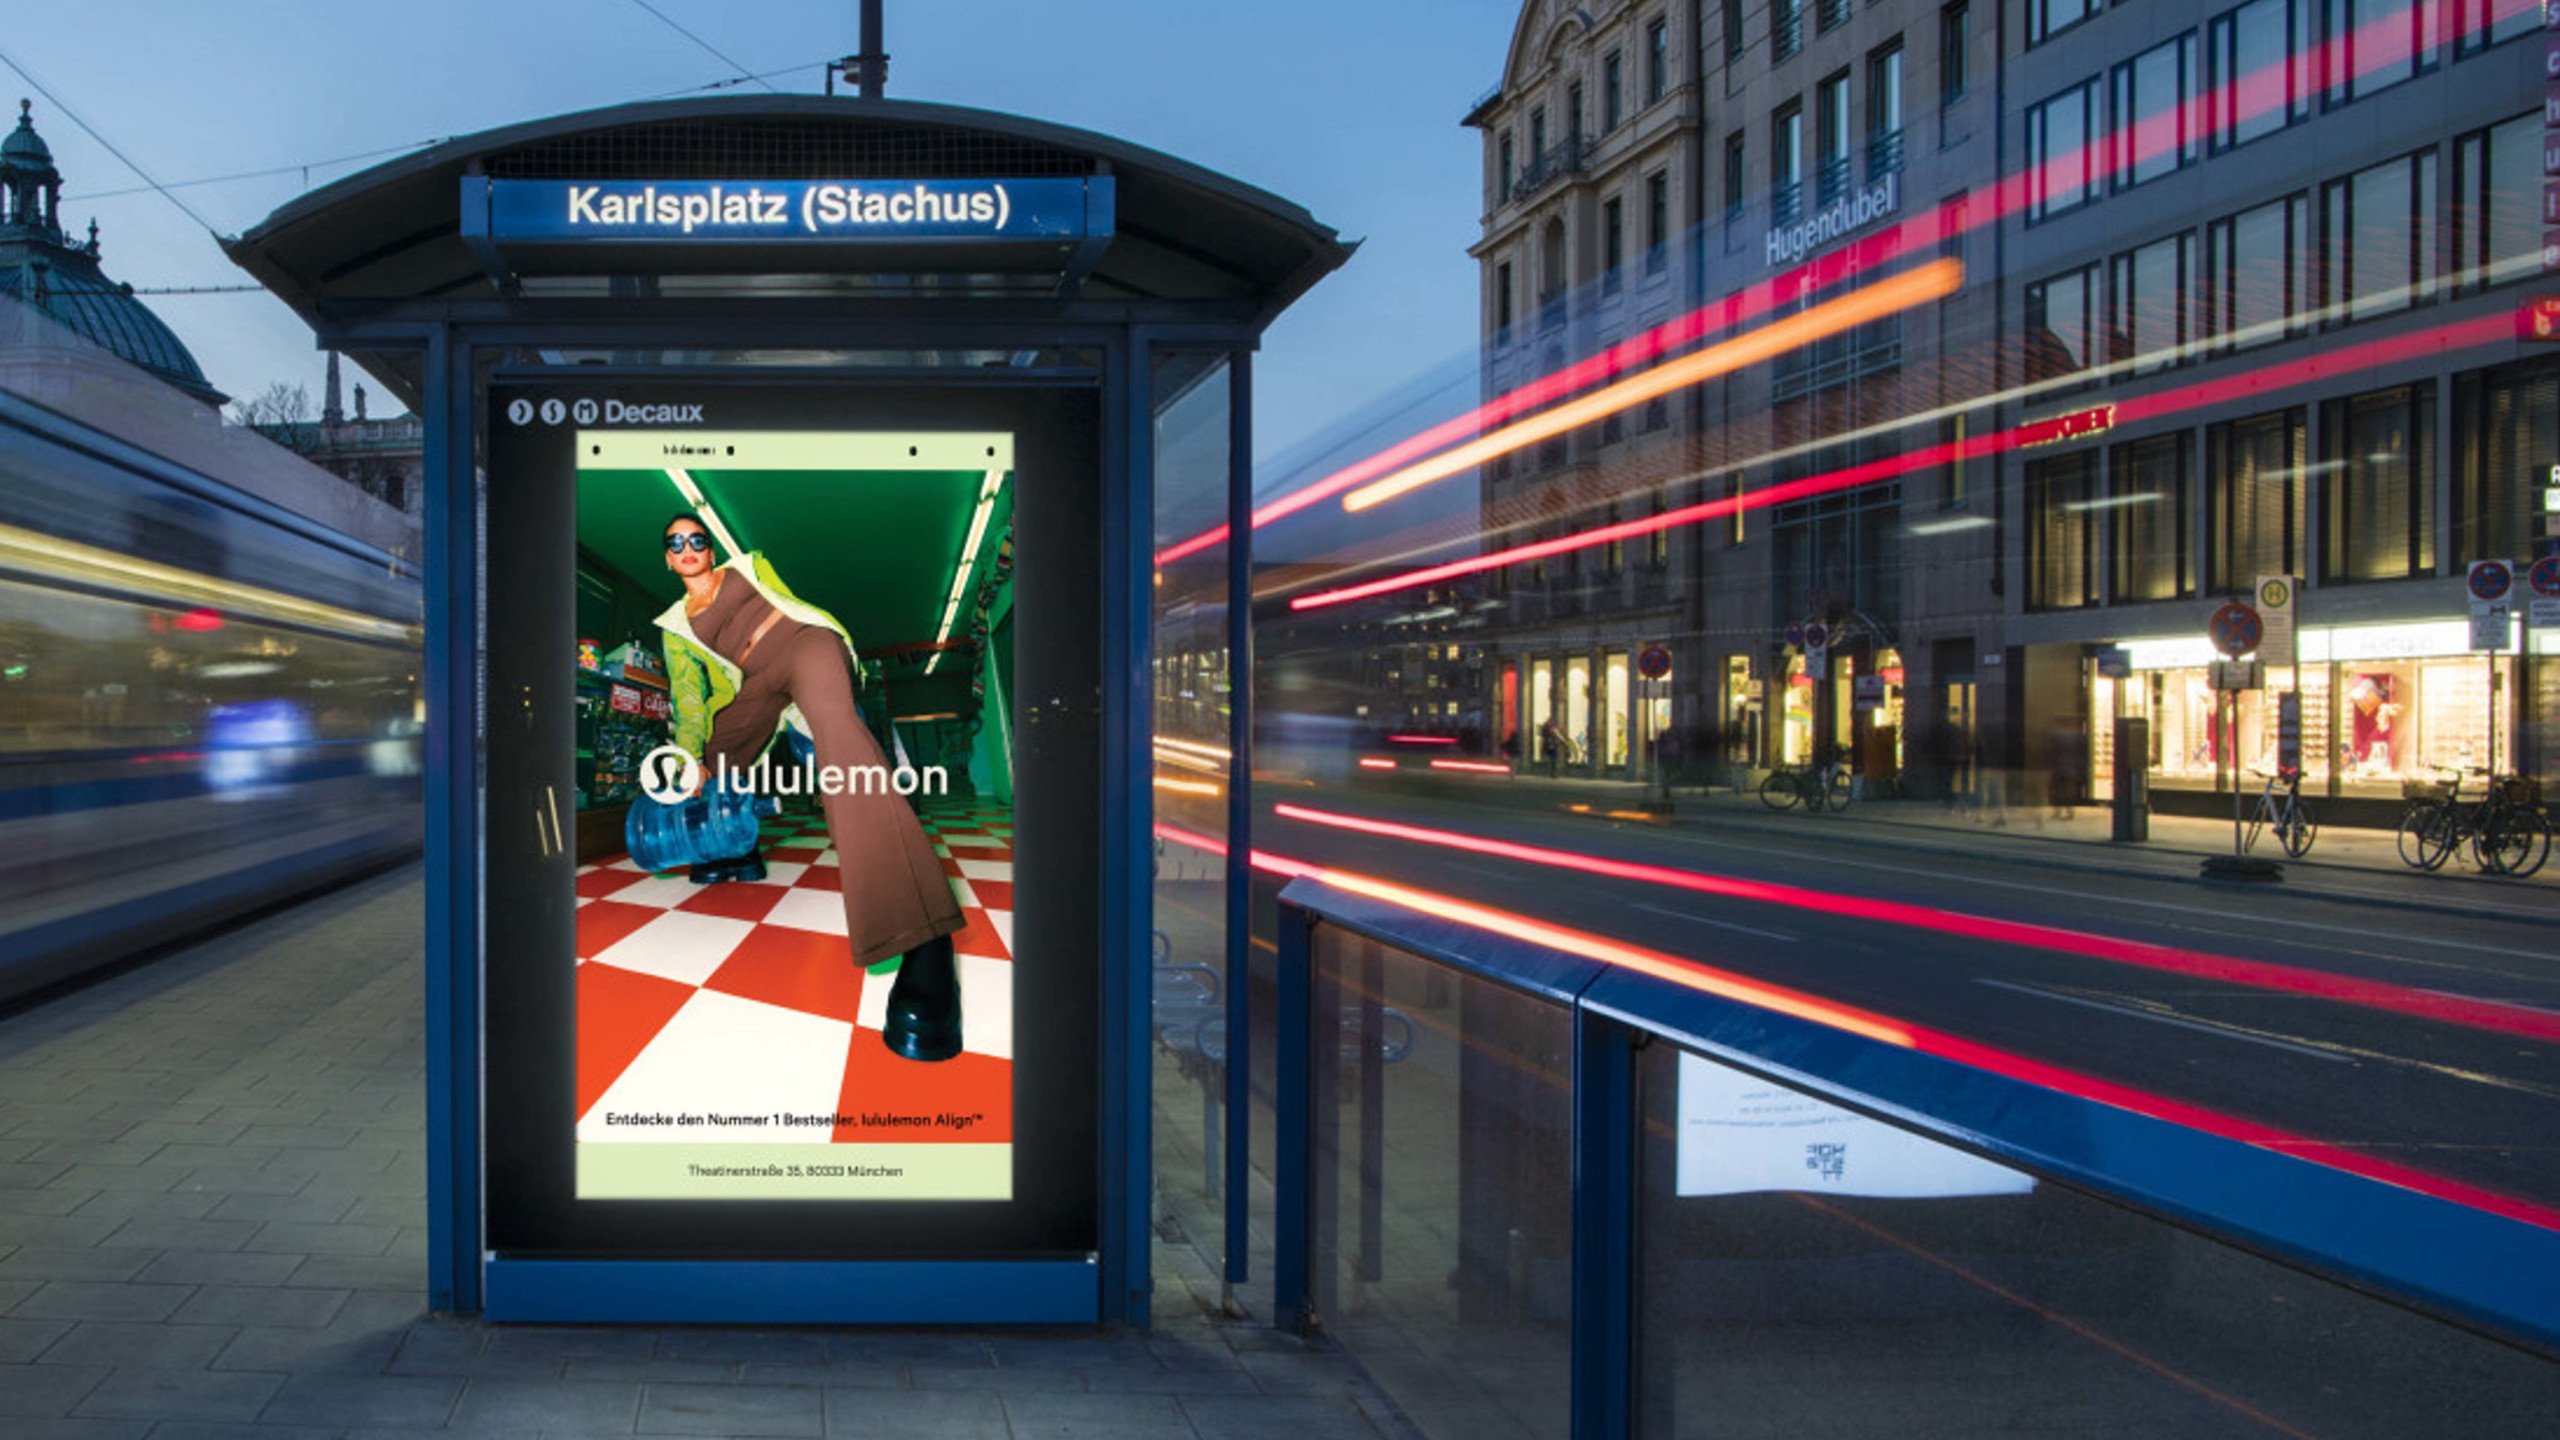 The multinational athletic apparel retailer achieved phenomenal results from several programmatic digital out of home (DOOH) campaigns